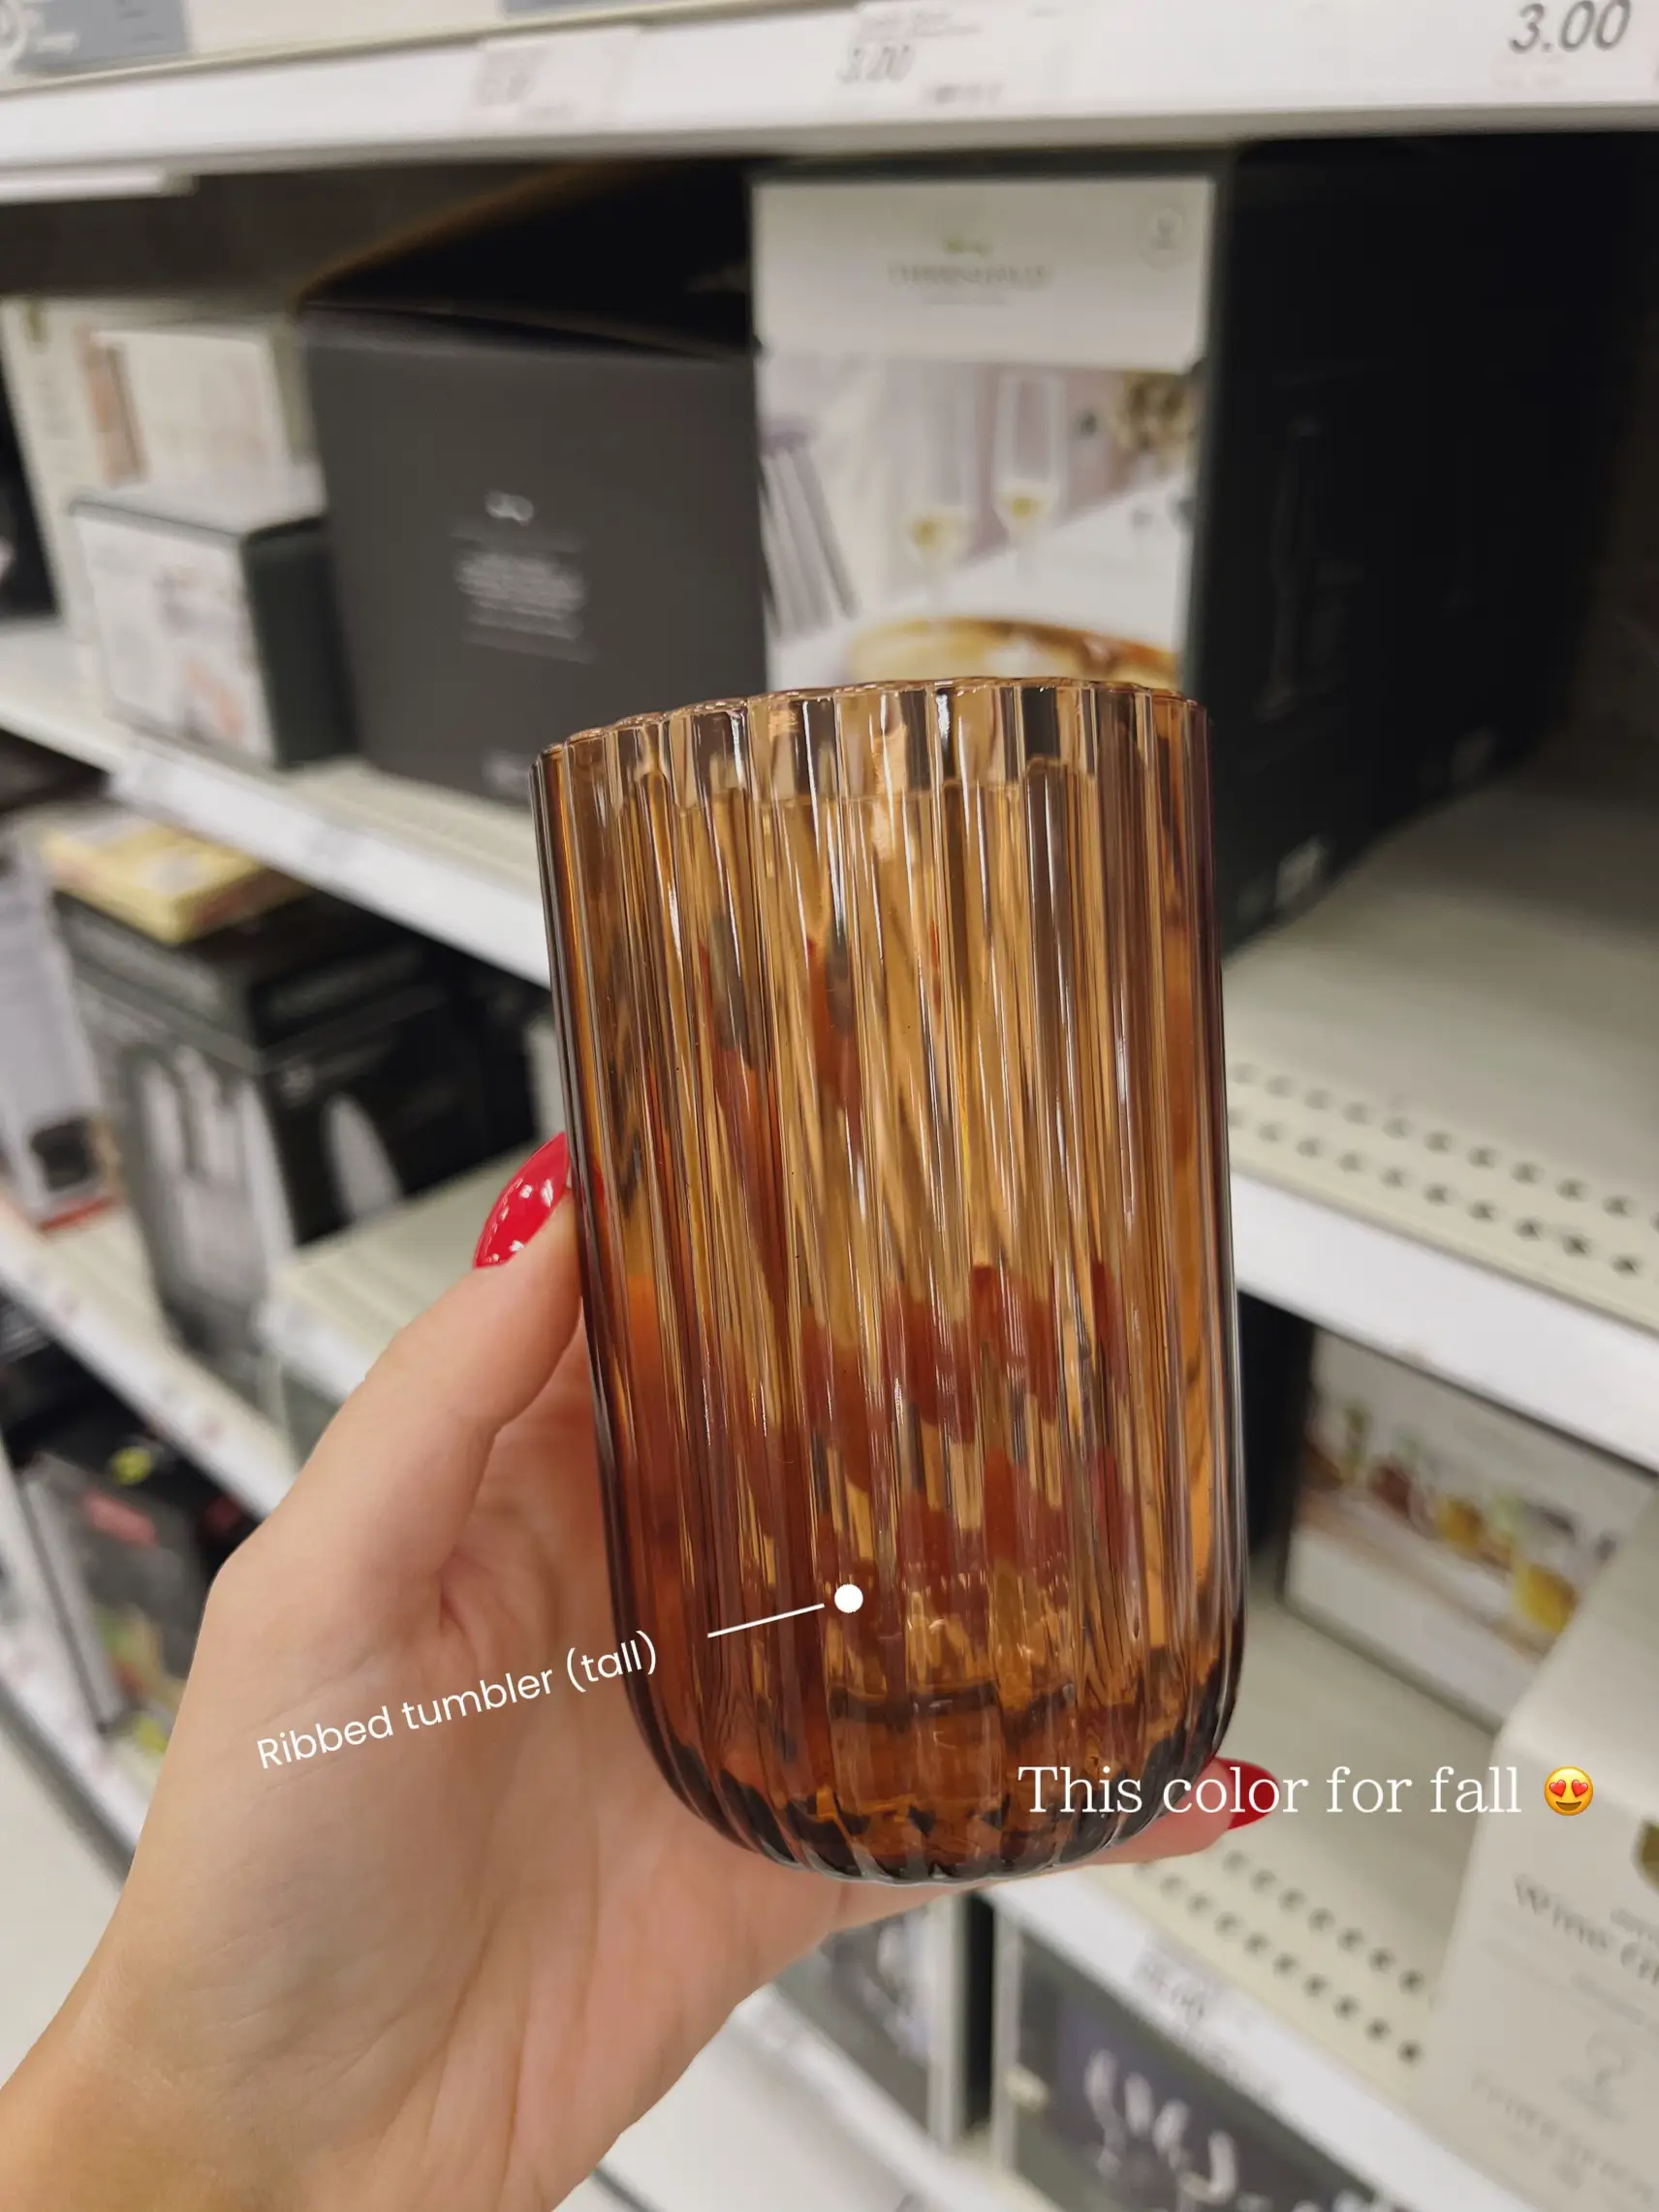 Have you seen the new Figmint kitchen essentials from Target? They are